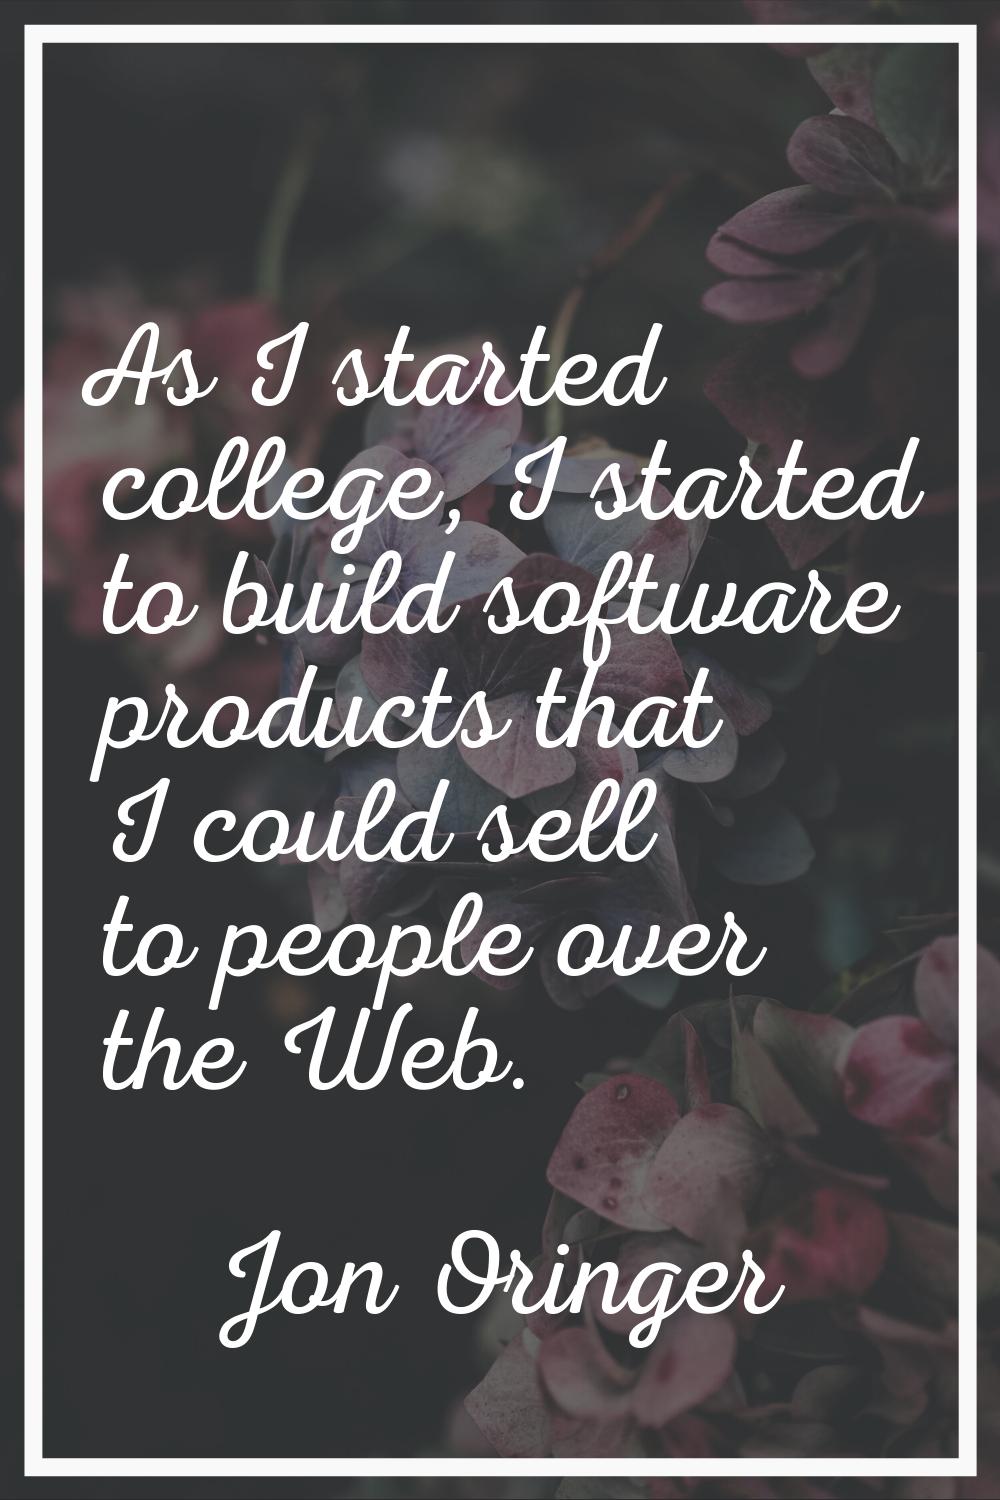 As I started college, I started to build software products that I could sell to people over the Web